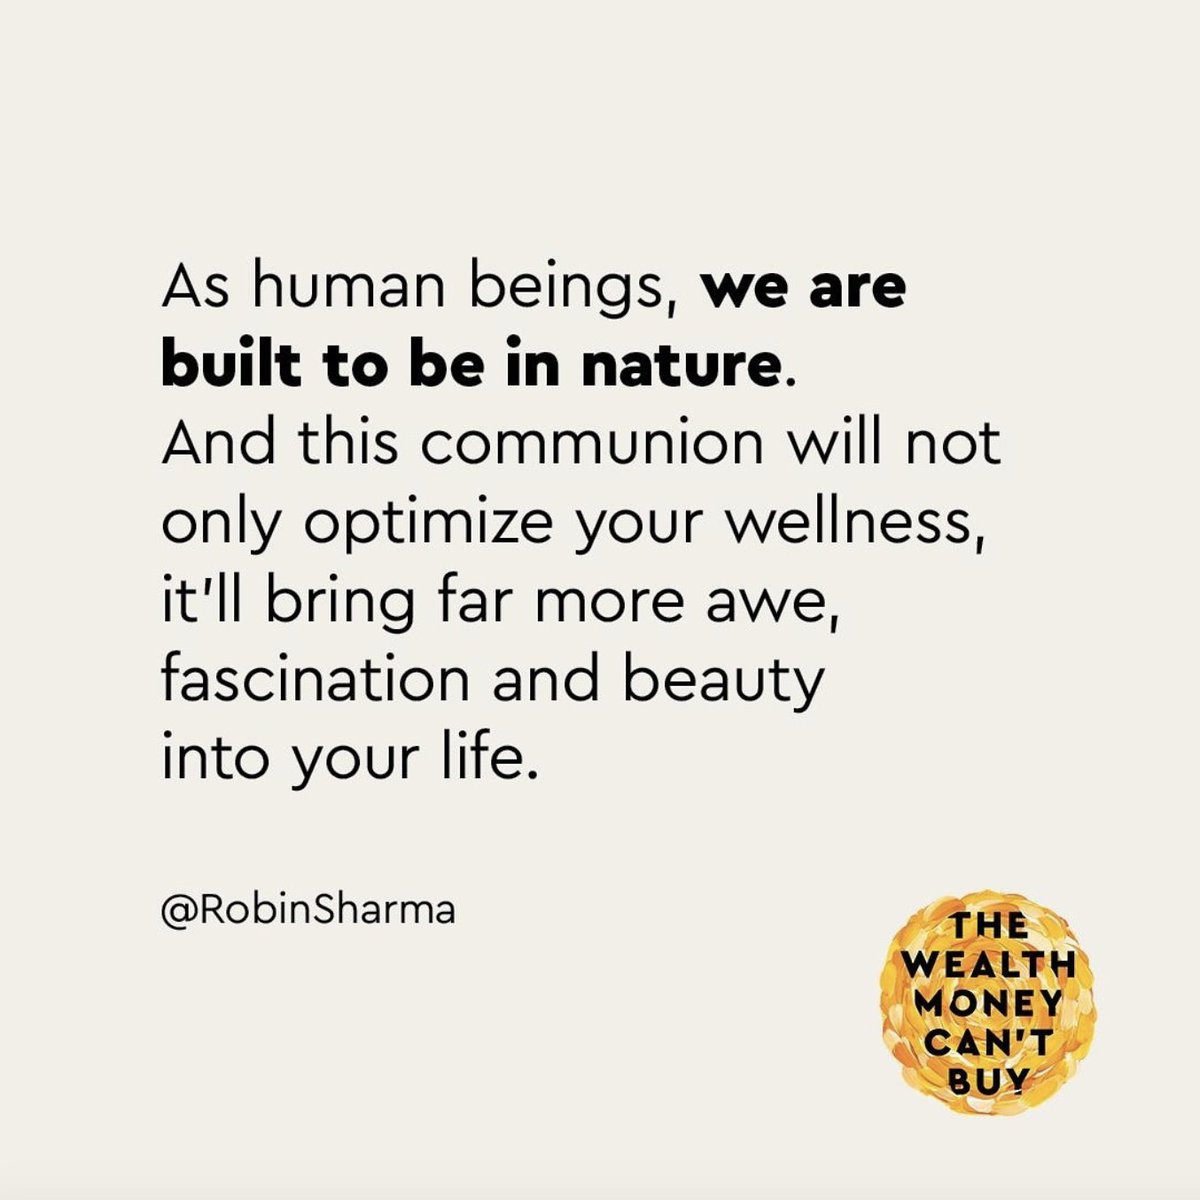 I encourage you to reconnect with nature daily. [Type “YES” below if you’ll do this.] Let it clarify your thinking, purify any stains on your heart, escalate your physicality and lift your spirituality. Nature is a gorgeous purifier. And toxic people don’t transform the world.